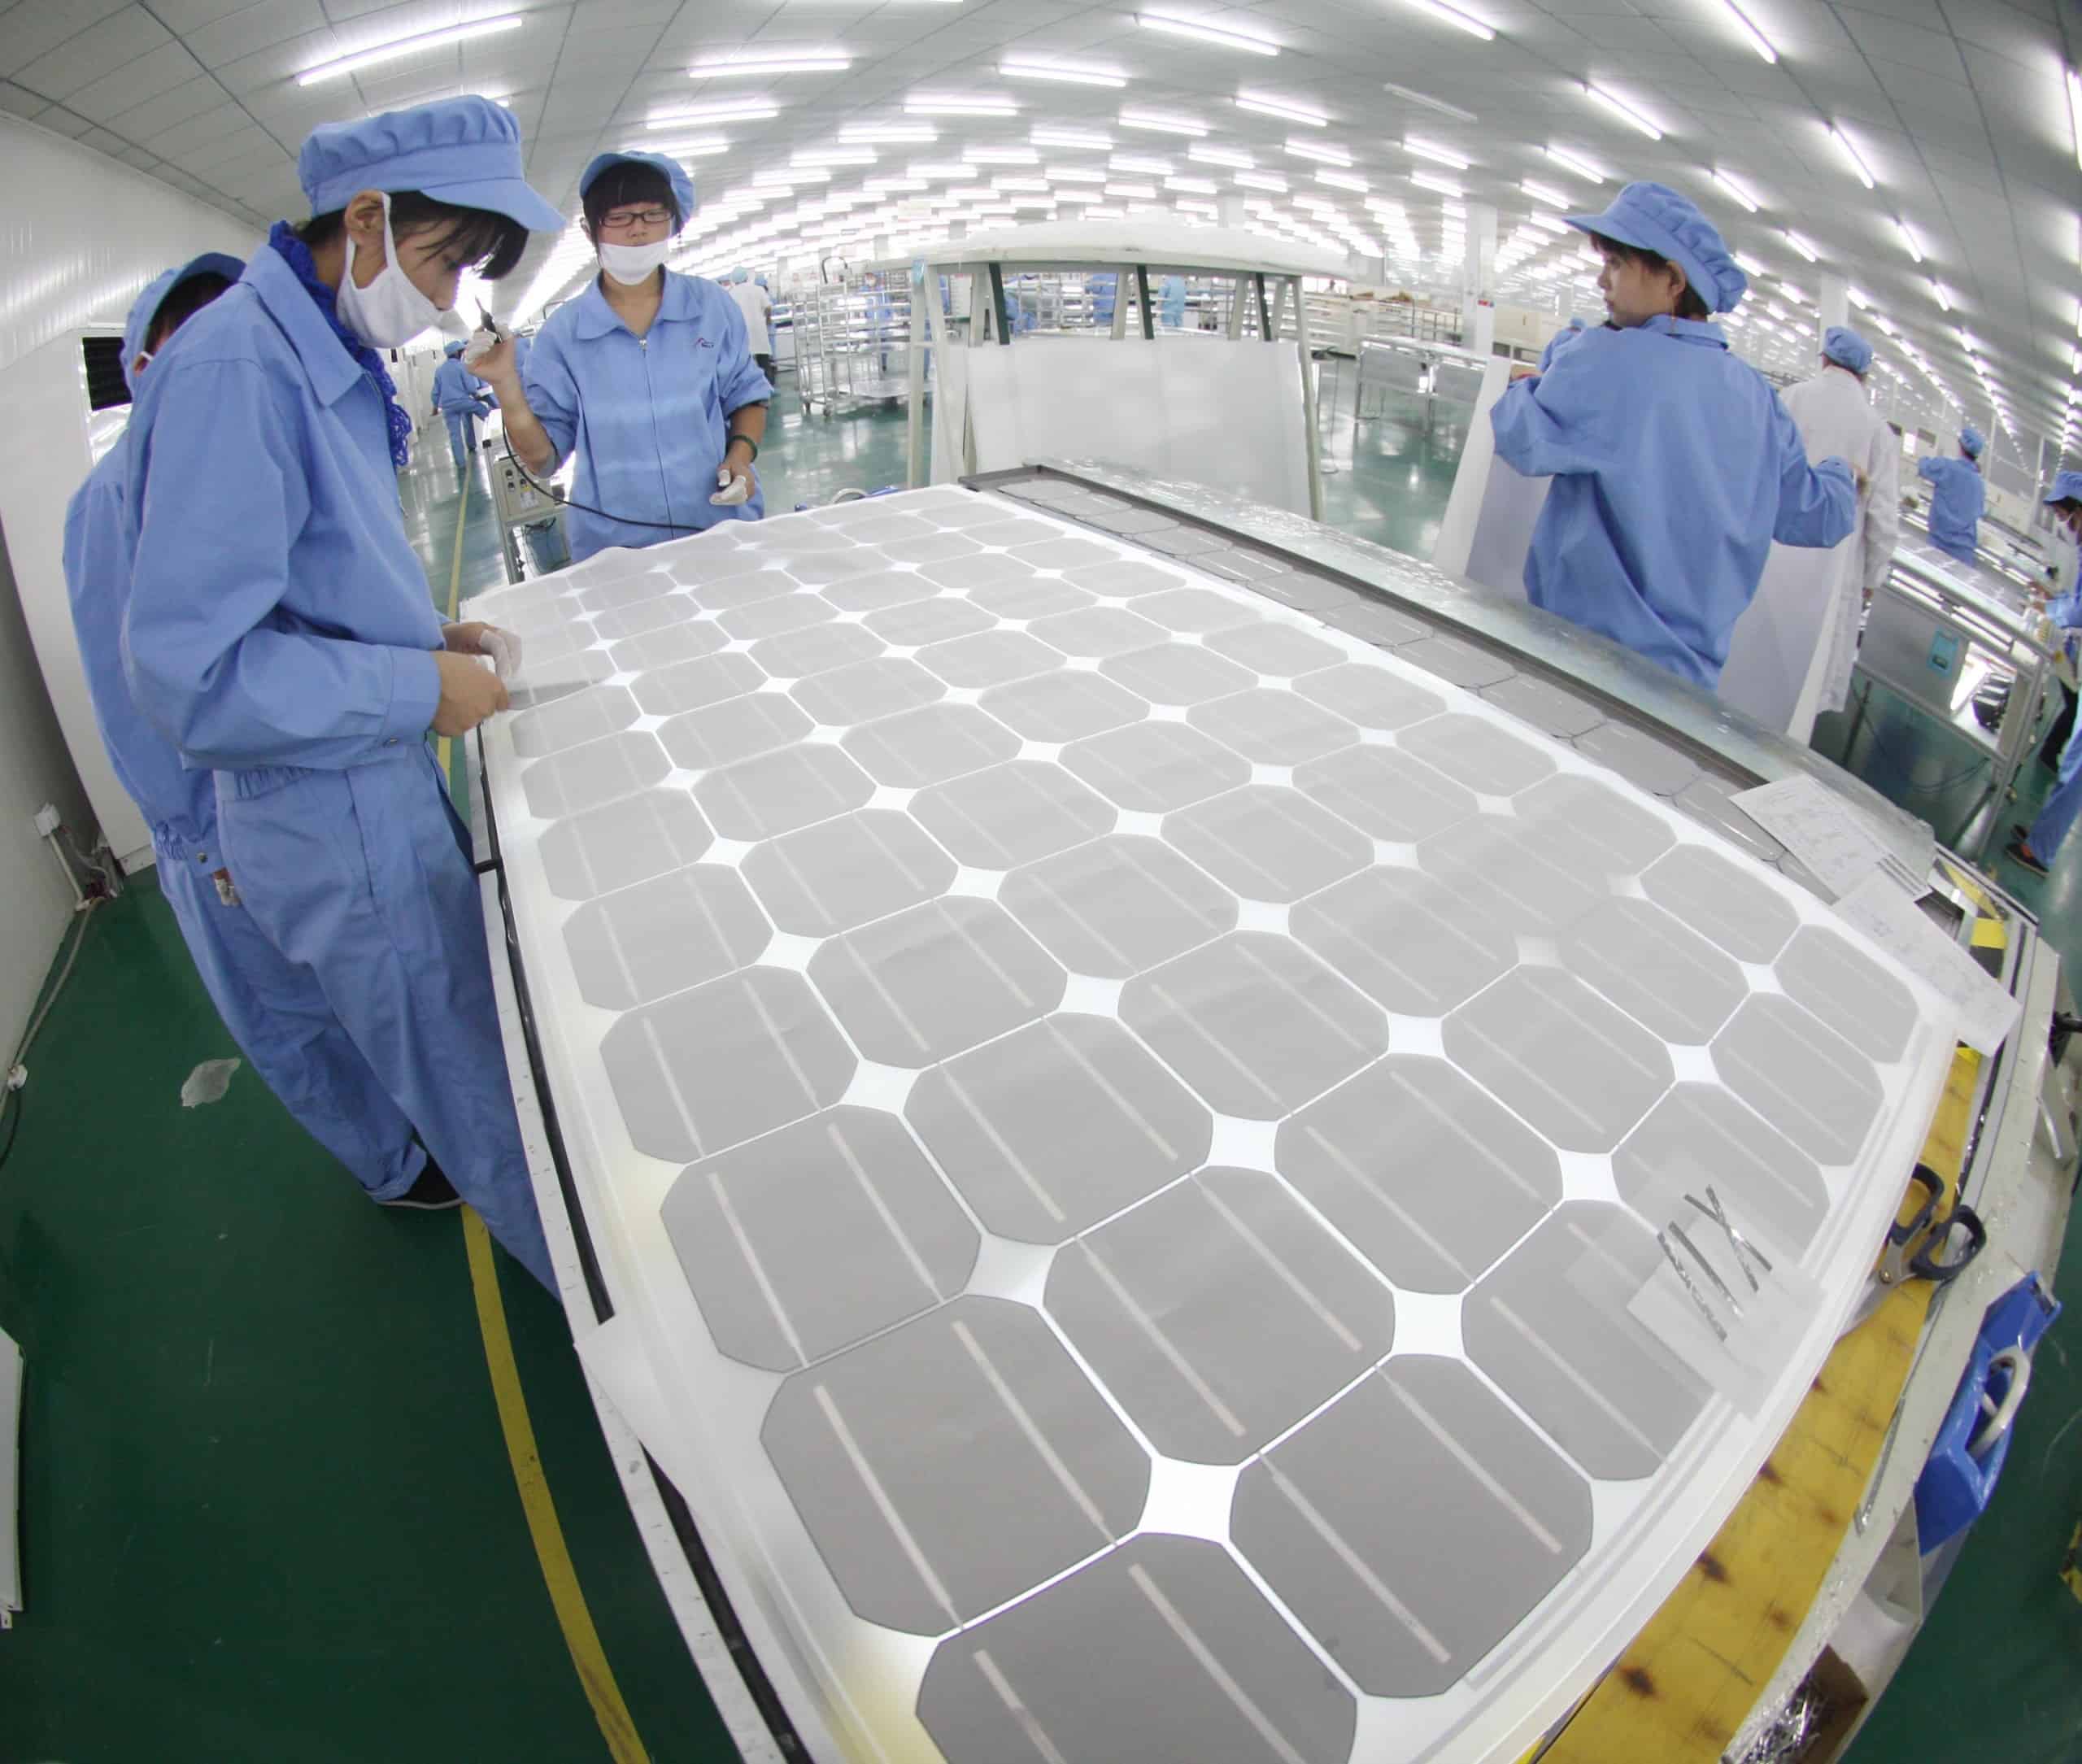 Solar cell modules being produced in a factory in Jiangsu province, China.